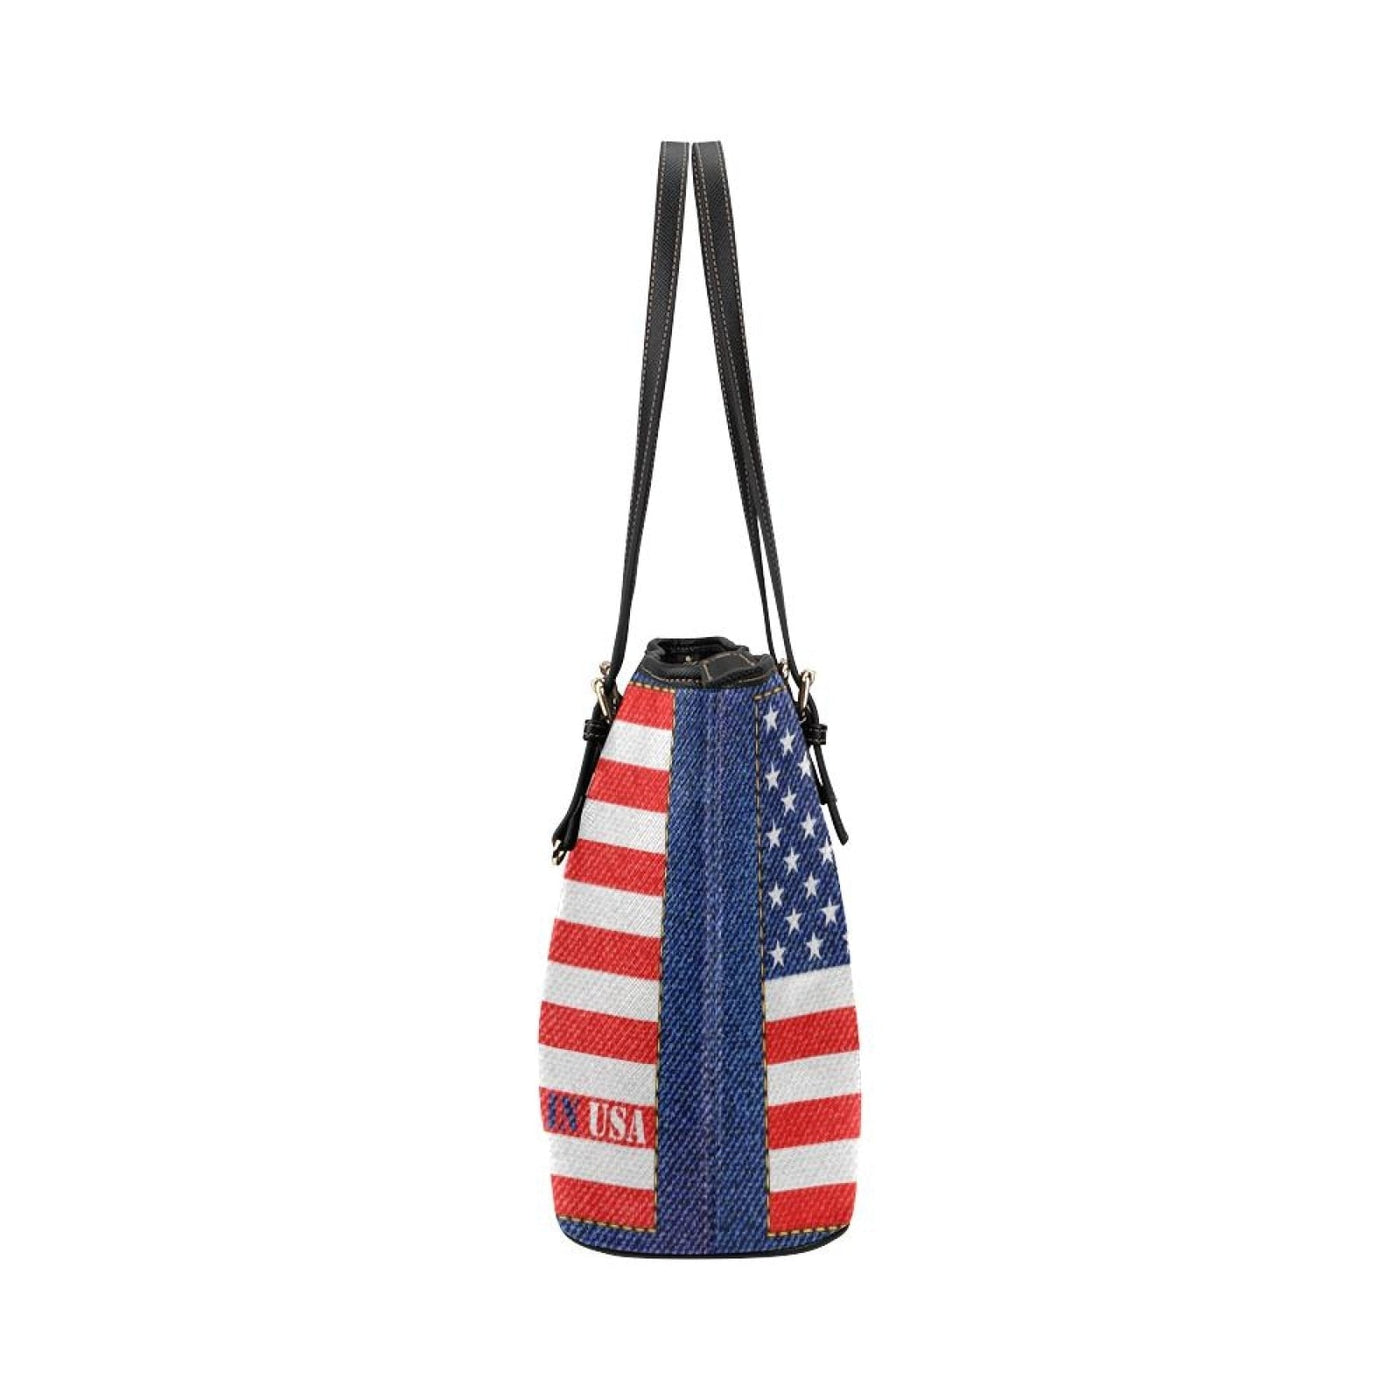 Large Leather Tote Shoulder Bag - Stars And Stripes Usa Flag Print - Bags